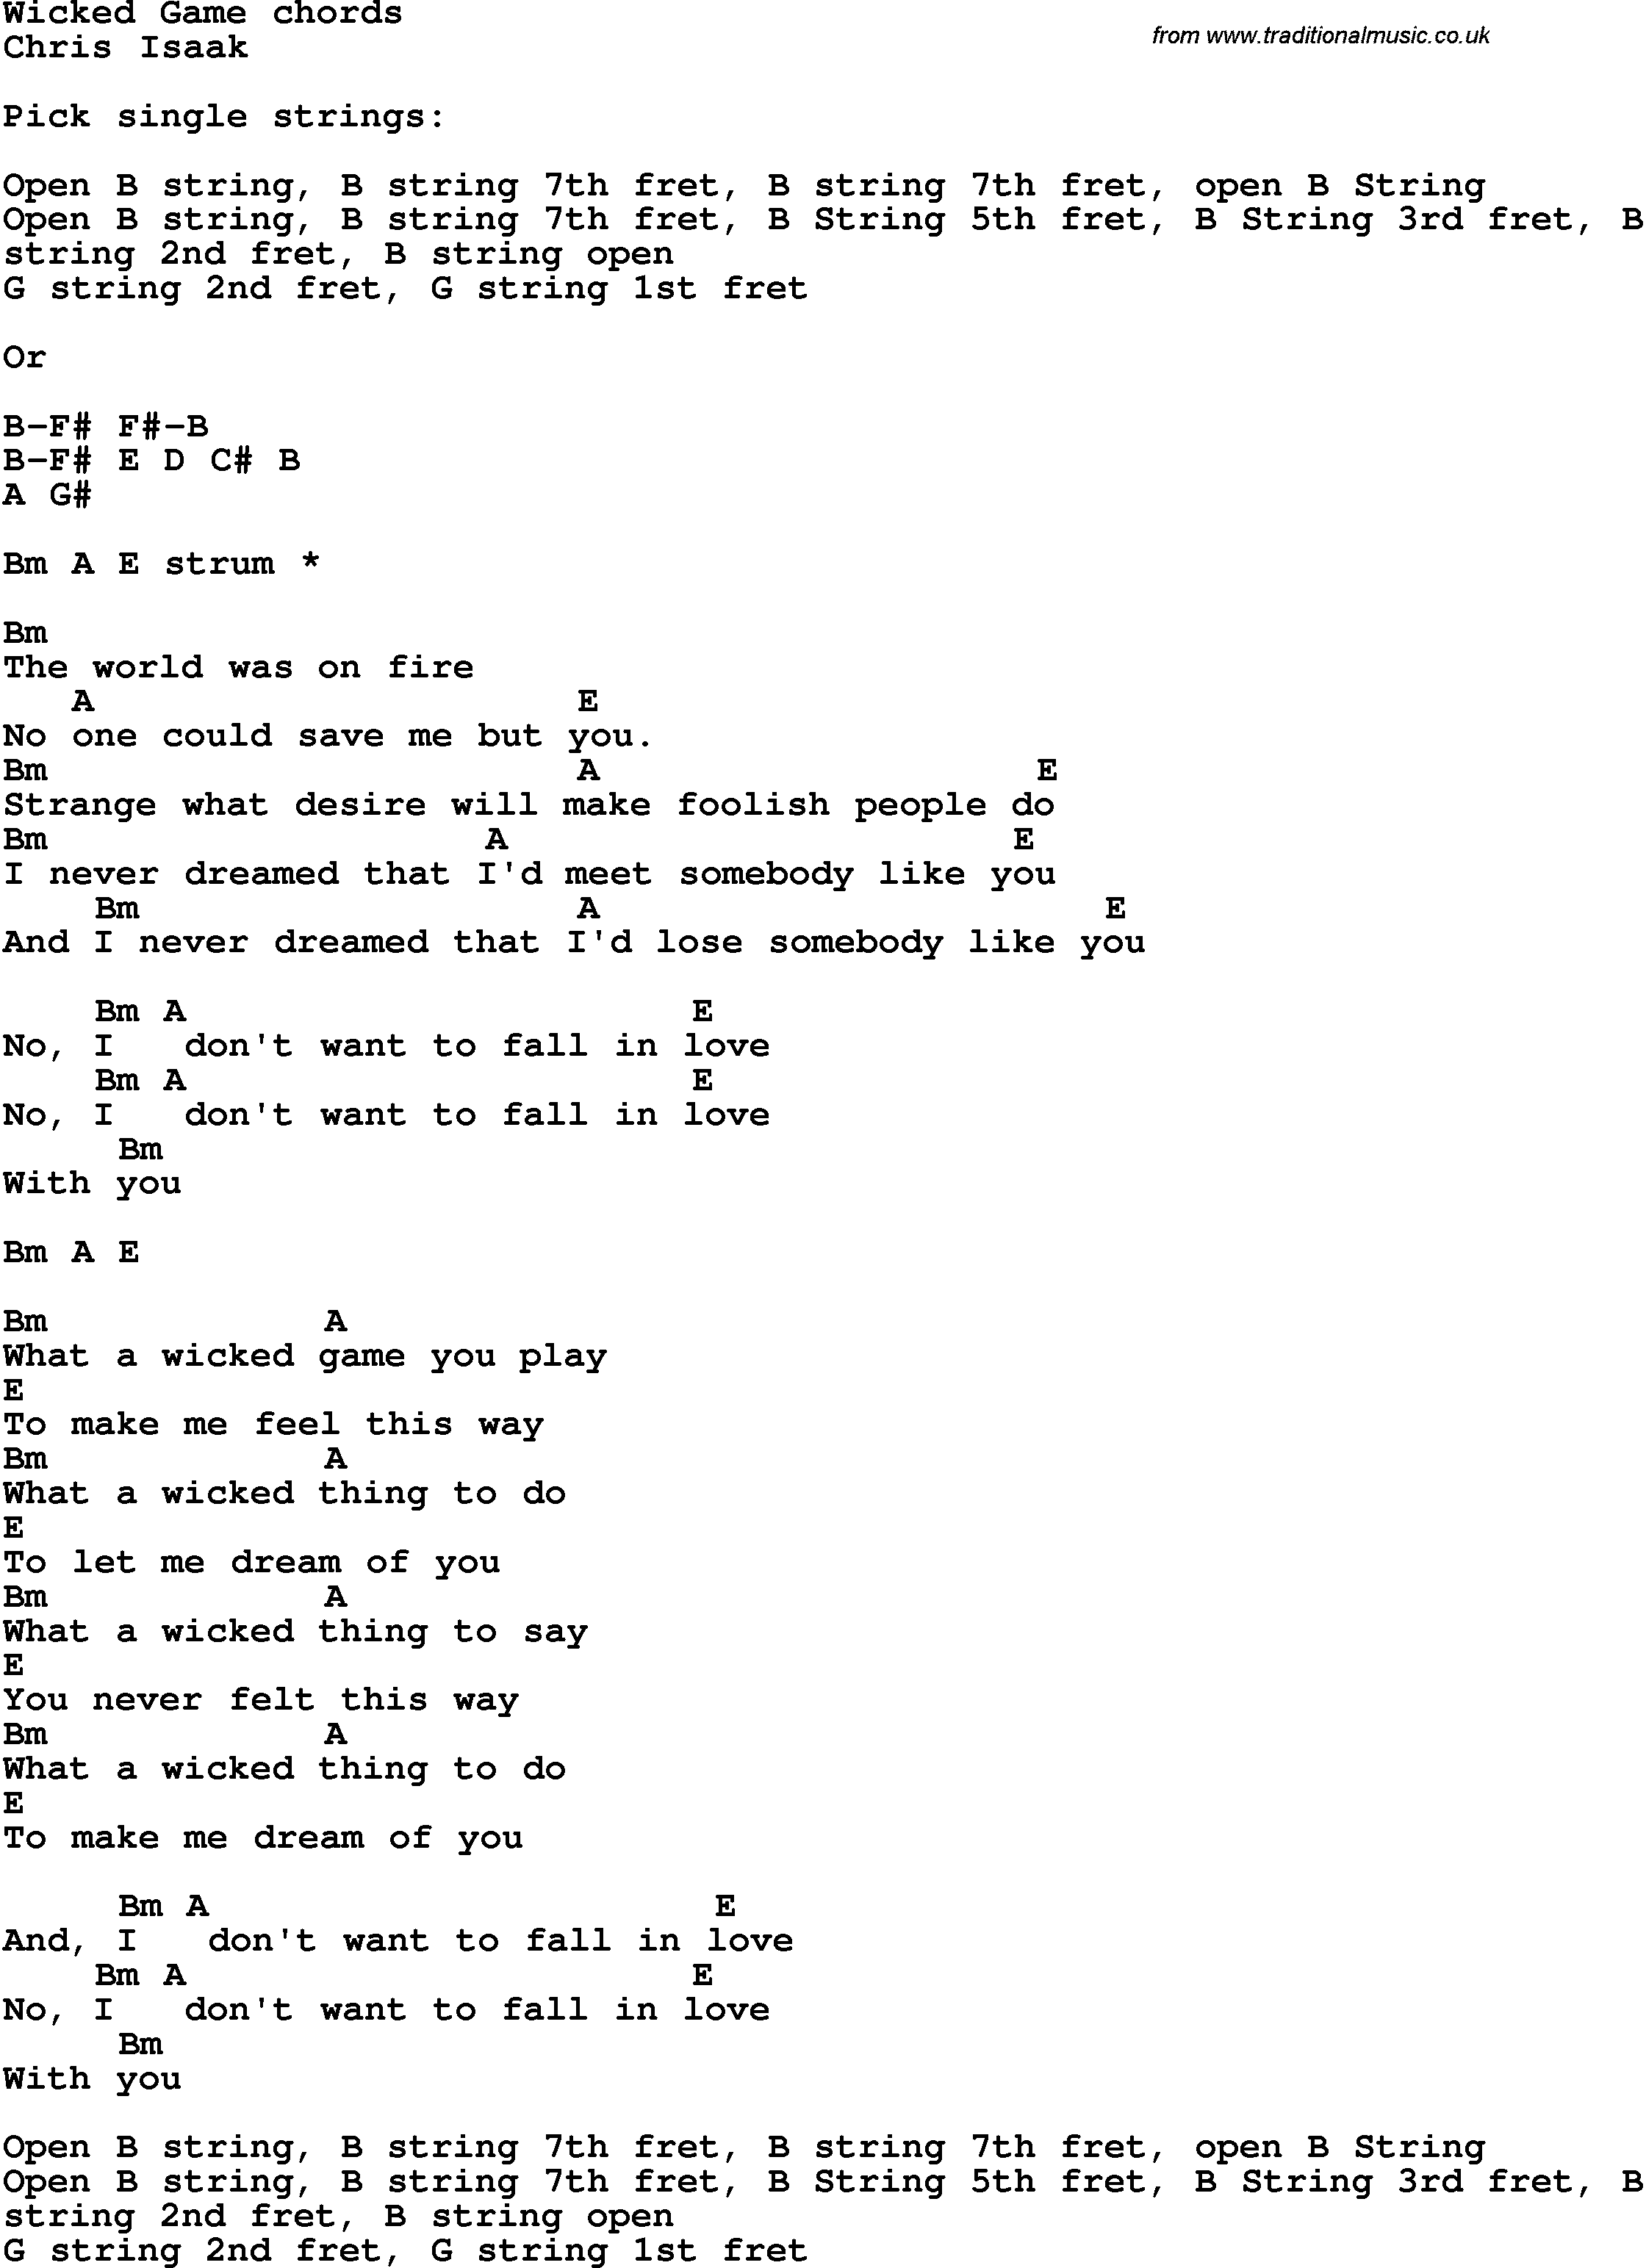 Song Lyrics with guitar chords for Wicked Games